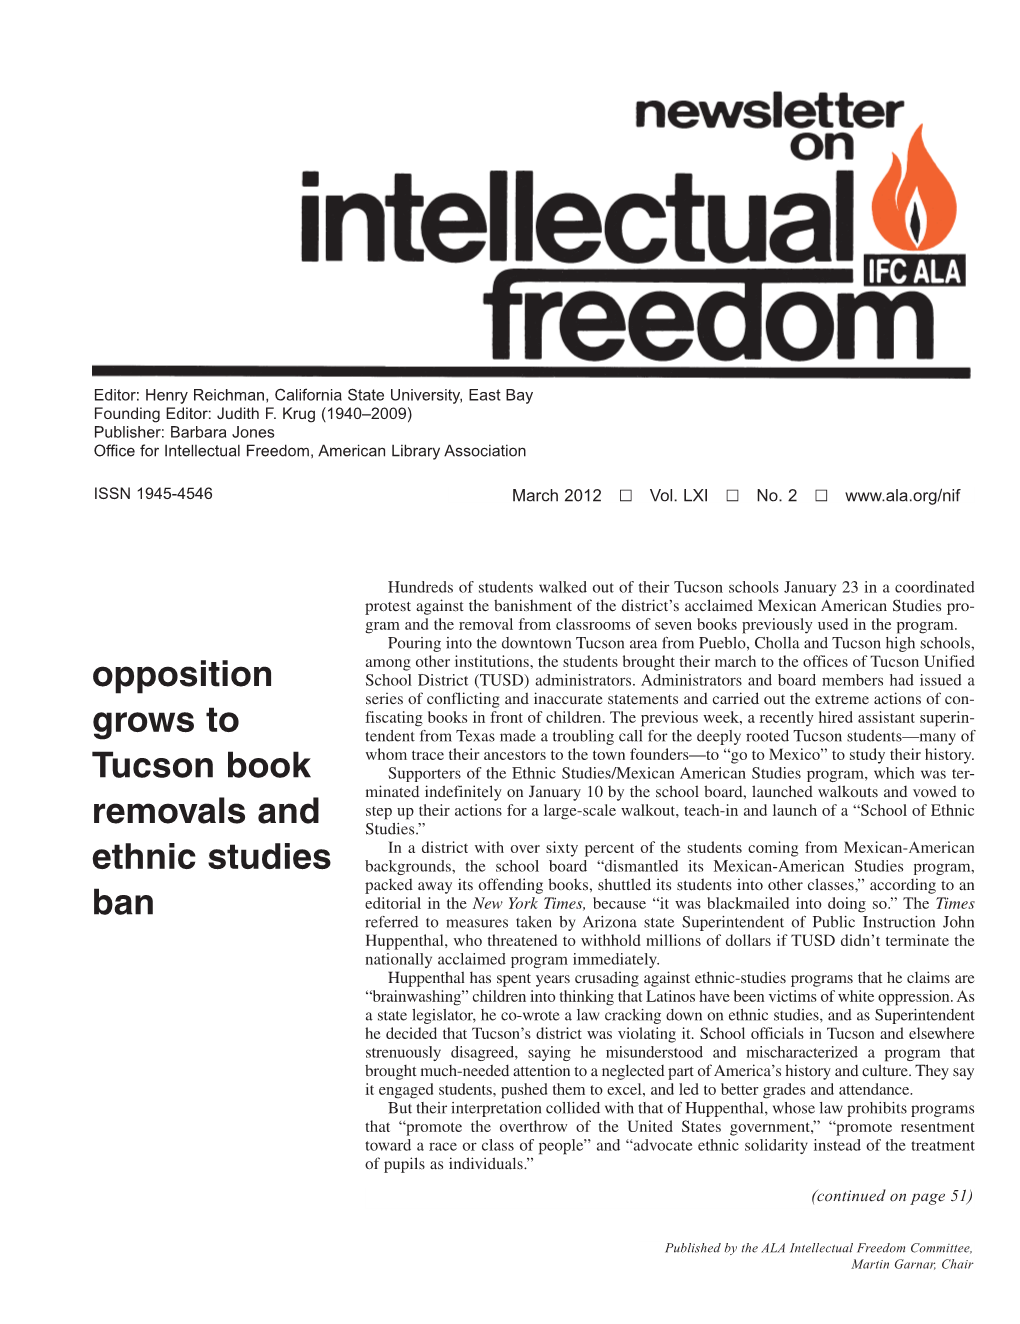 Opposition Grows to Tucson Book Removals and Ethnic Studies